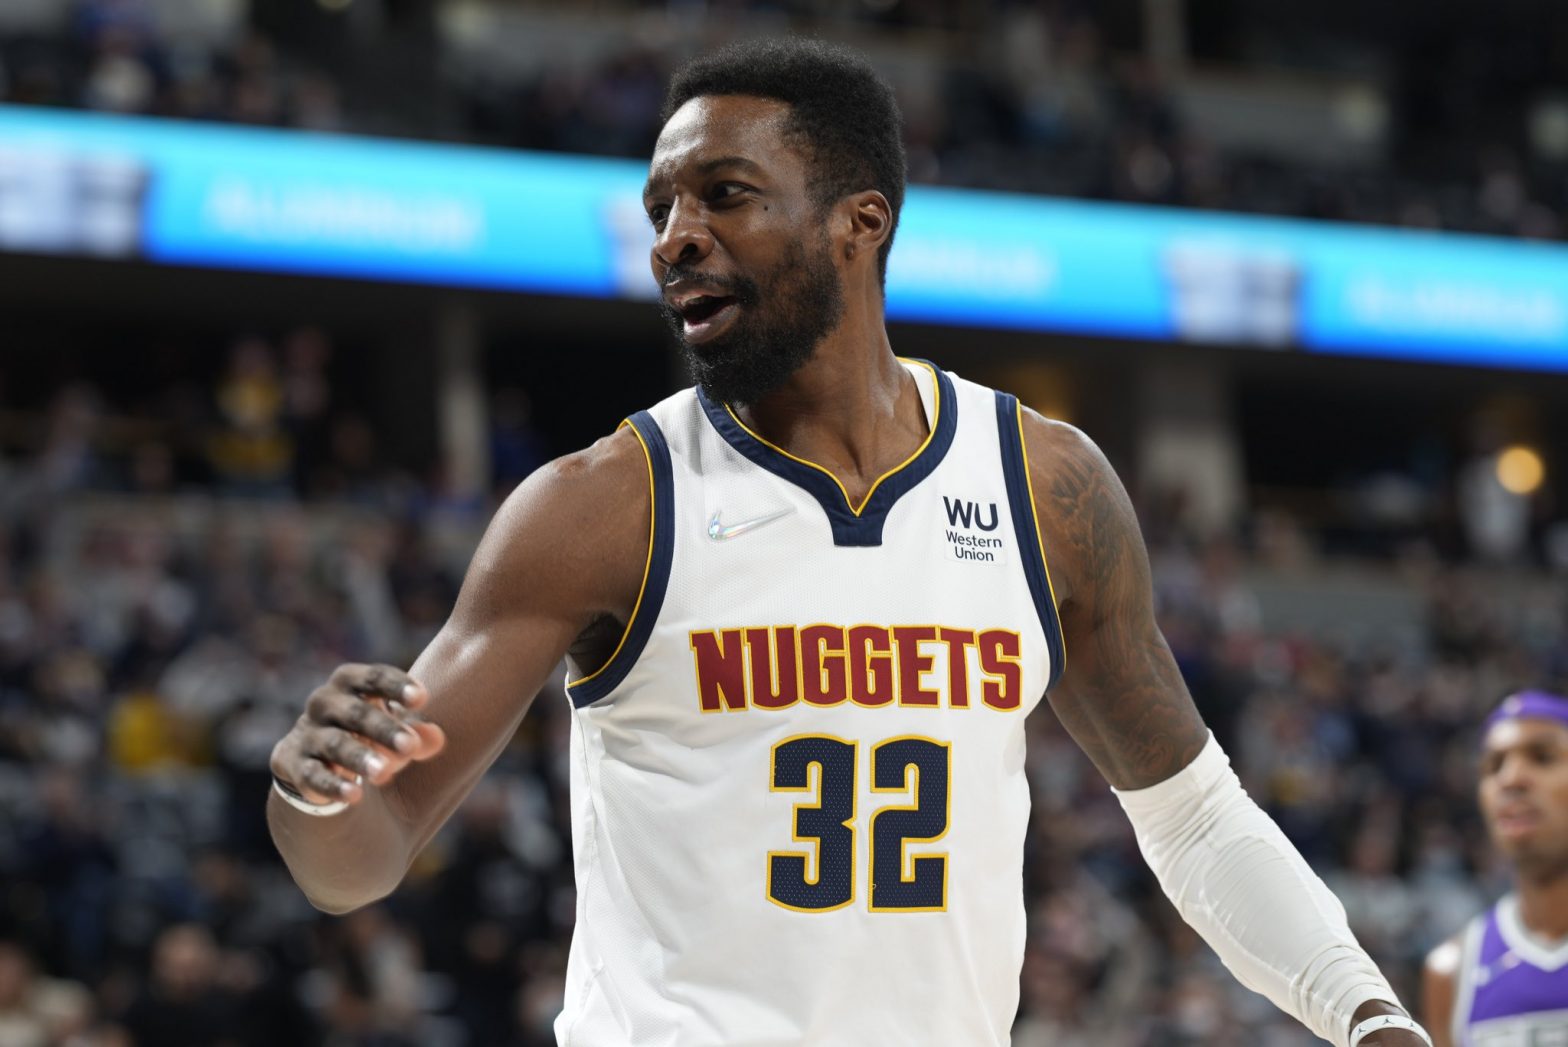 Denver Nuggets’ Jeff Green slams a dunk in NBA Finals Game 5 getting fans on their feet | Watch video